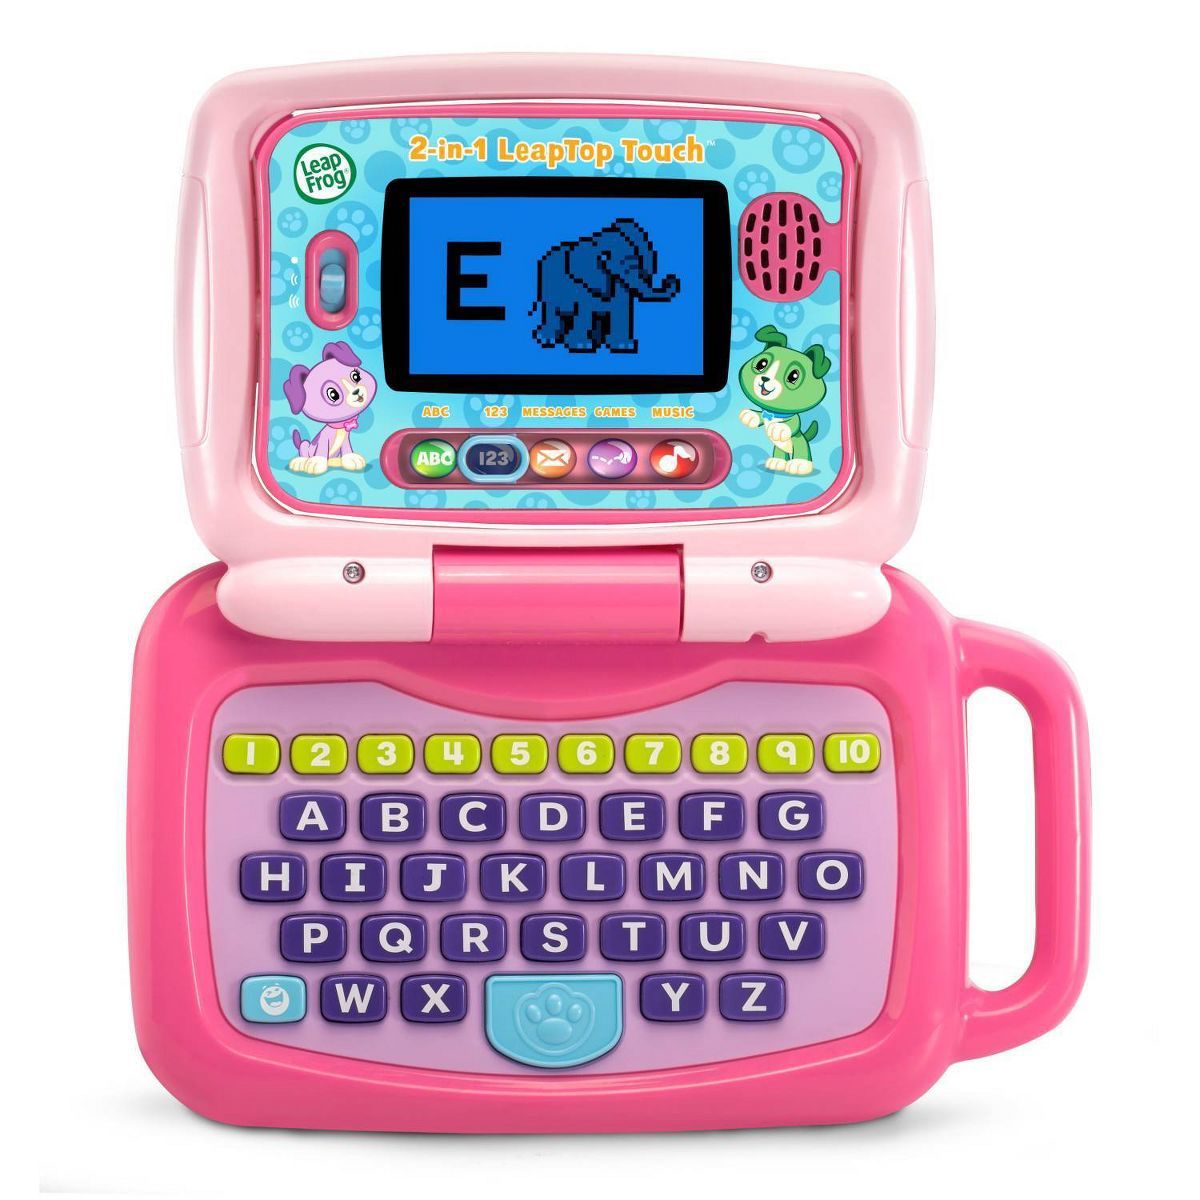 LeapFrog 2-in-1 LeapTop Touch - Pink | Target